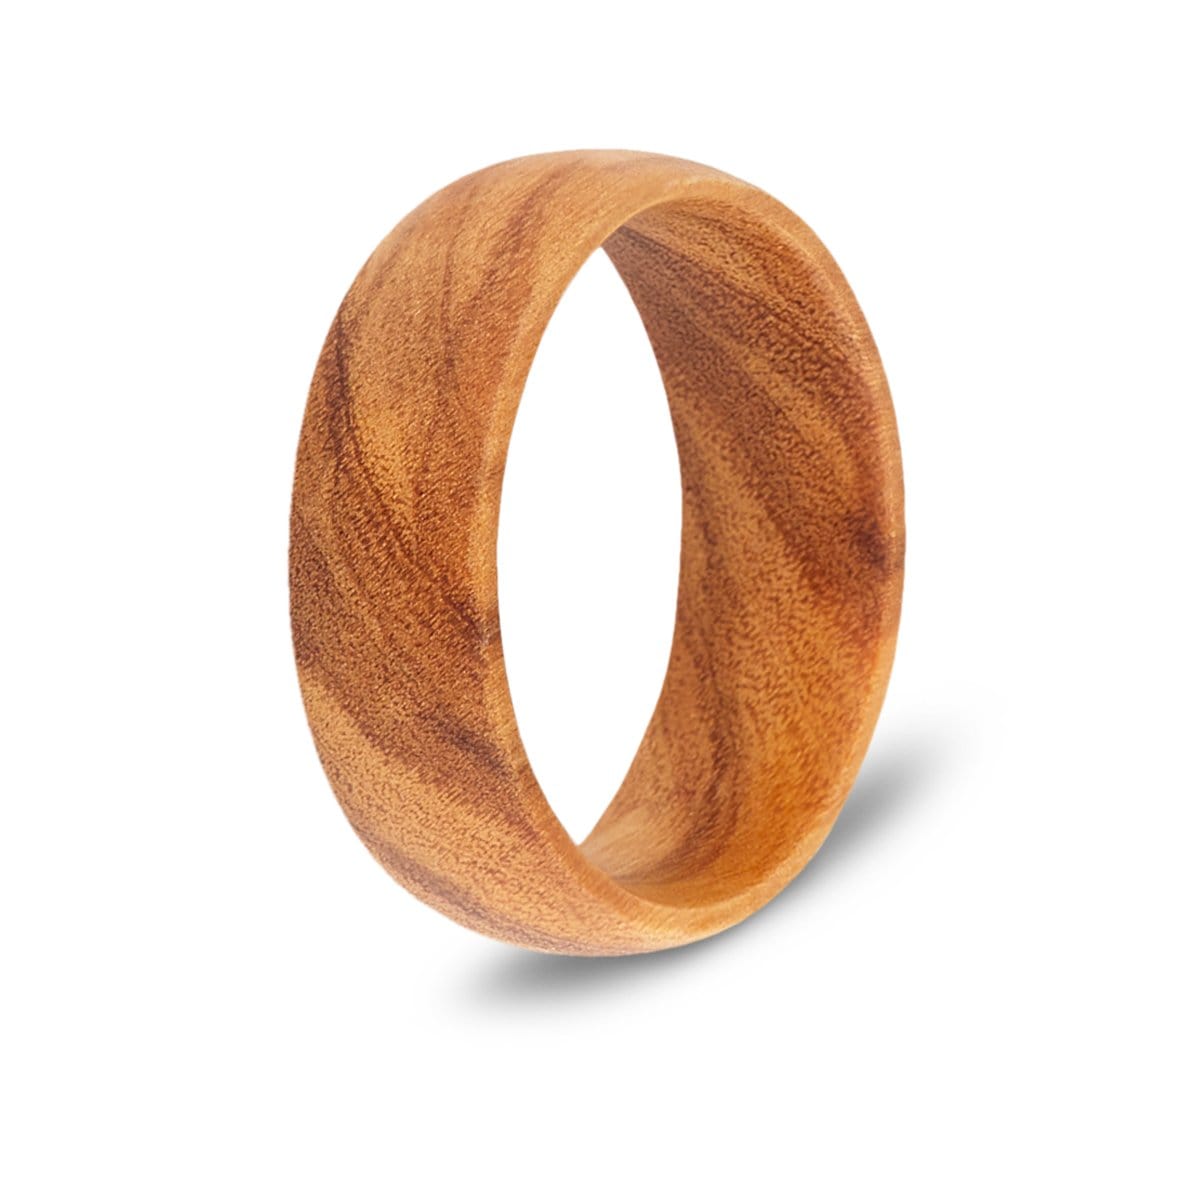 Wooden Ring Yew - SIZE 10 US